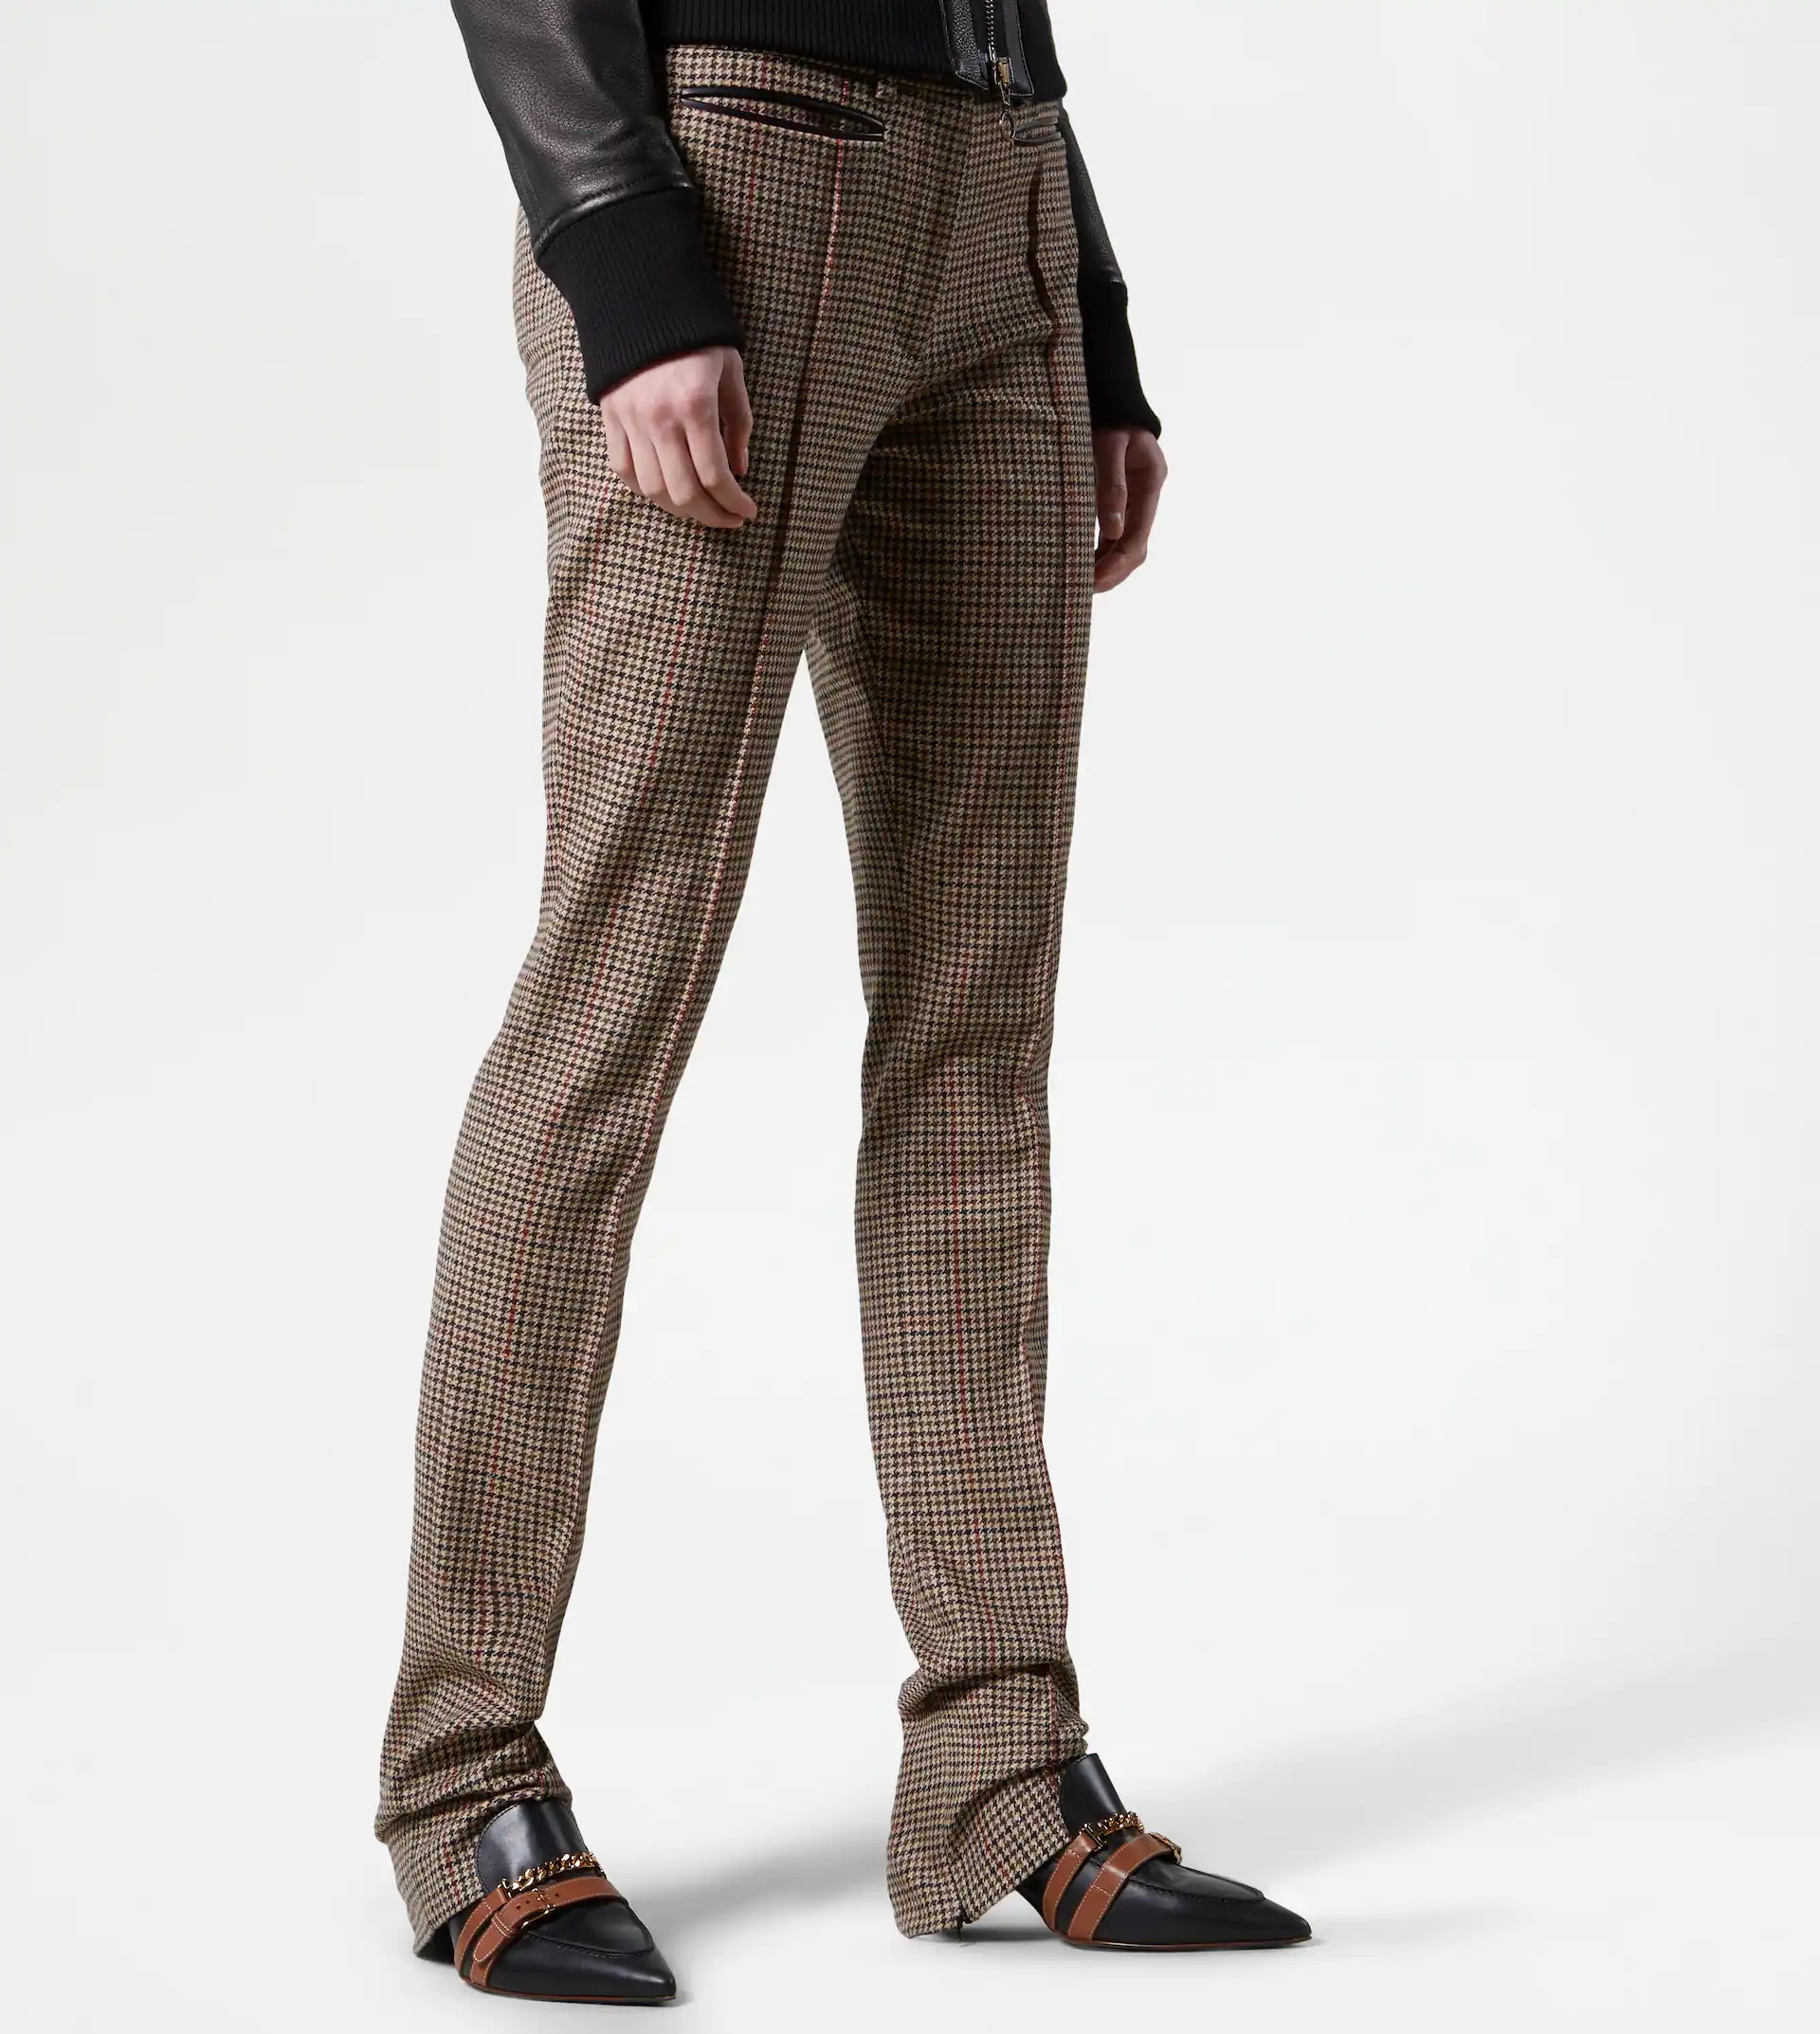 MIXED WOOL TROUSERS - RED, BLUE, BROWN - 6